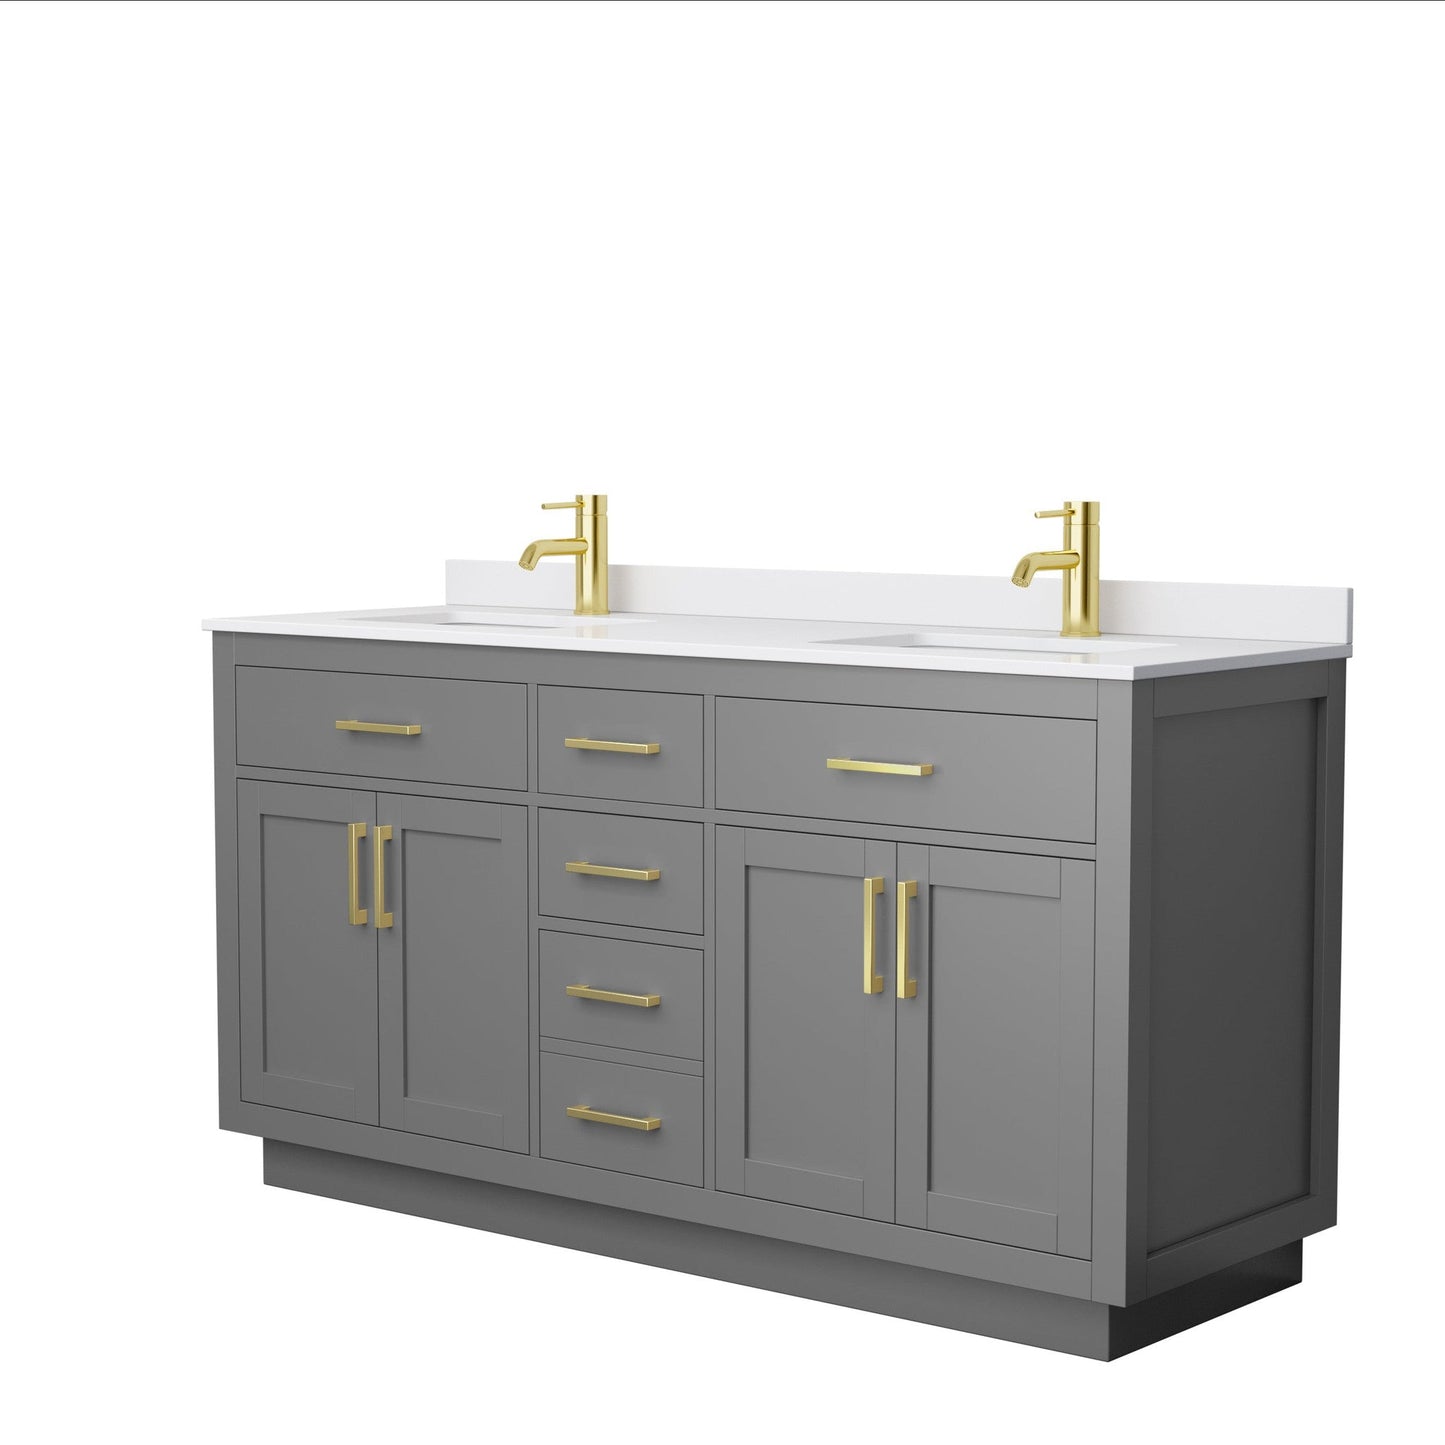 Beckett 66" Double Bathroom Vanity With Toe Kick in Dark Gray, White Cultured Marble Countertop, Undermount Square Sinks, Brushed Gold Trim